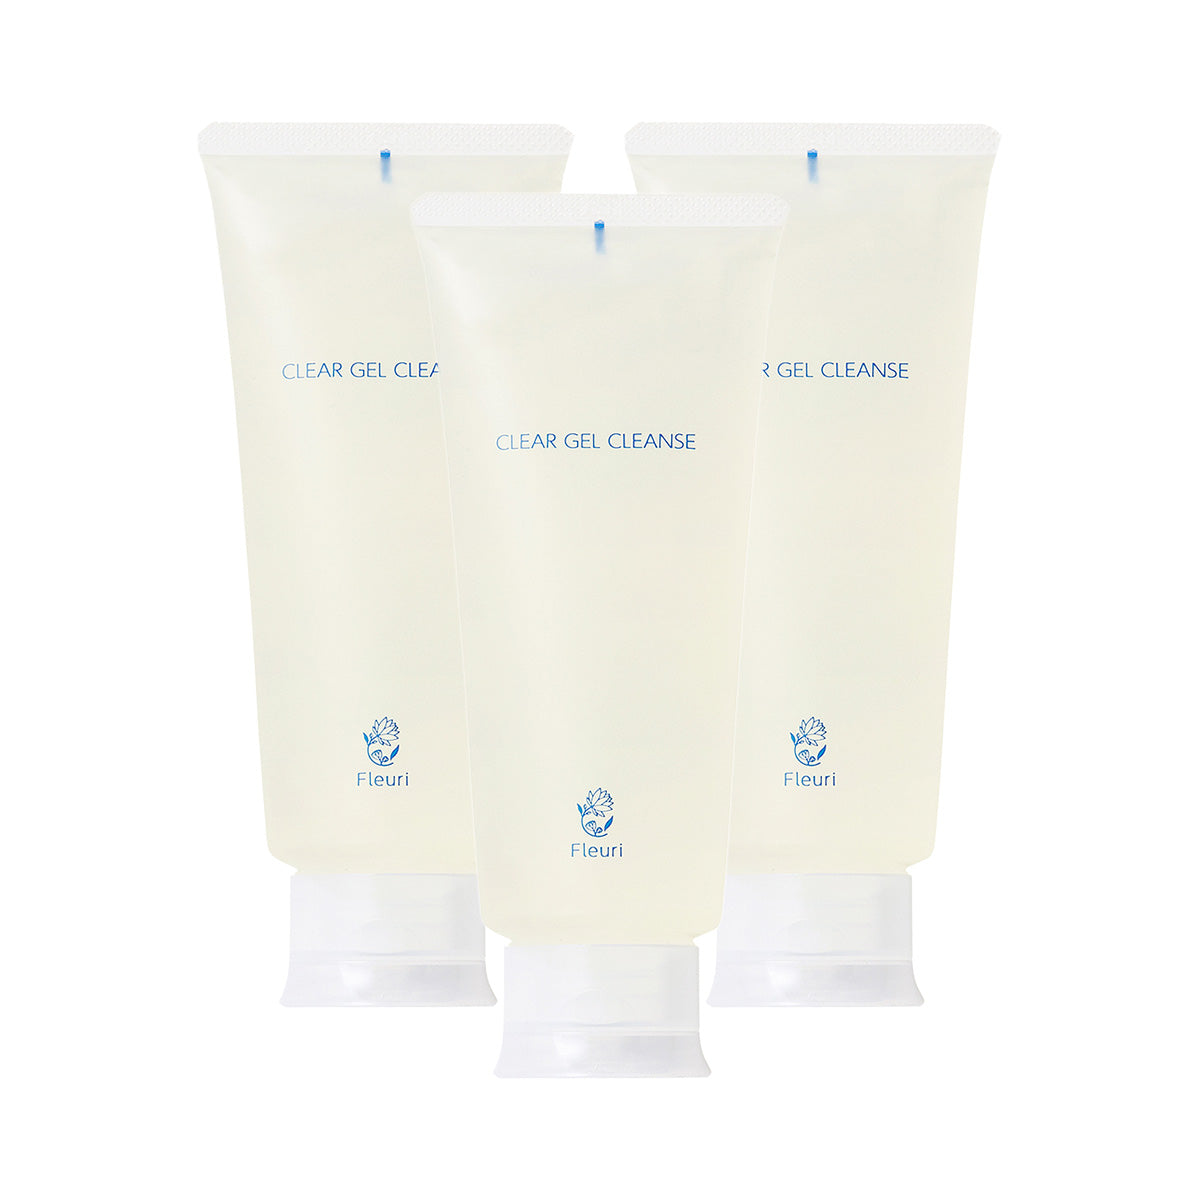 CLEAR GEL CLEANSE (3PCS) for 3 MONTHS -Gentle Makeup Remover-